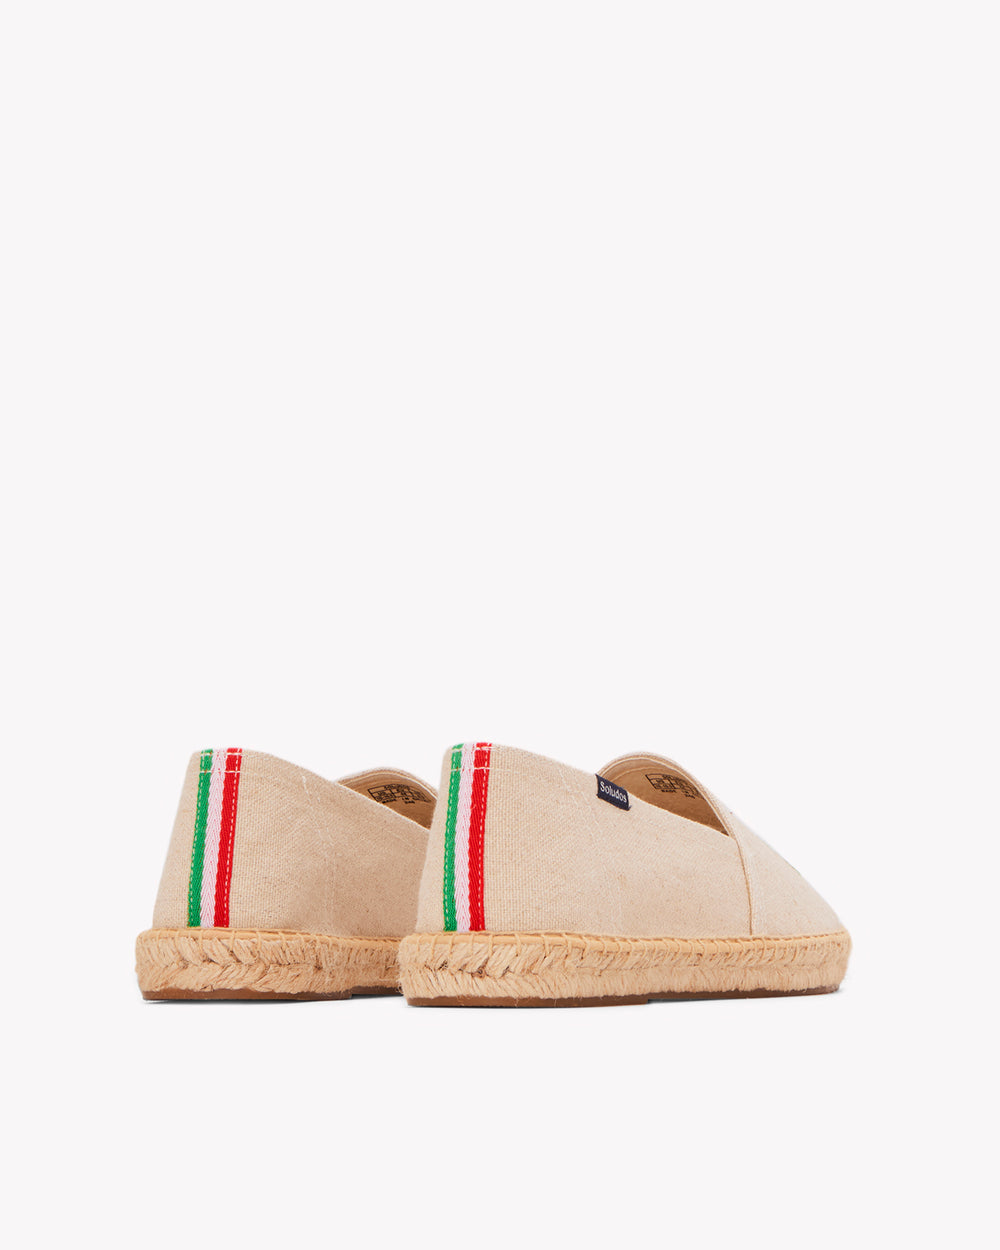 The Original Espadrille - Embroidery / Italy - Natural Undyed - Men's